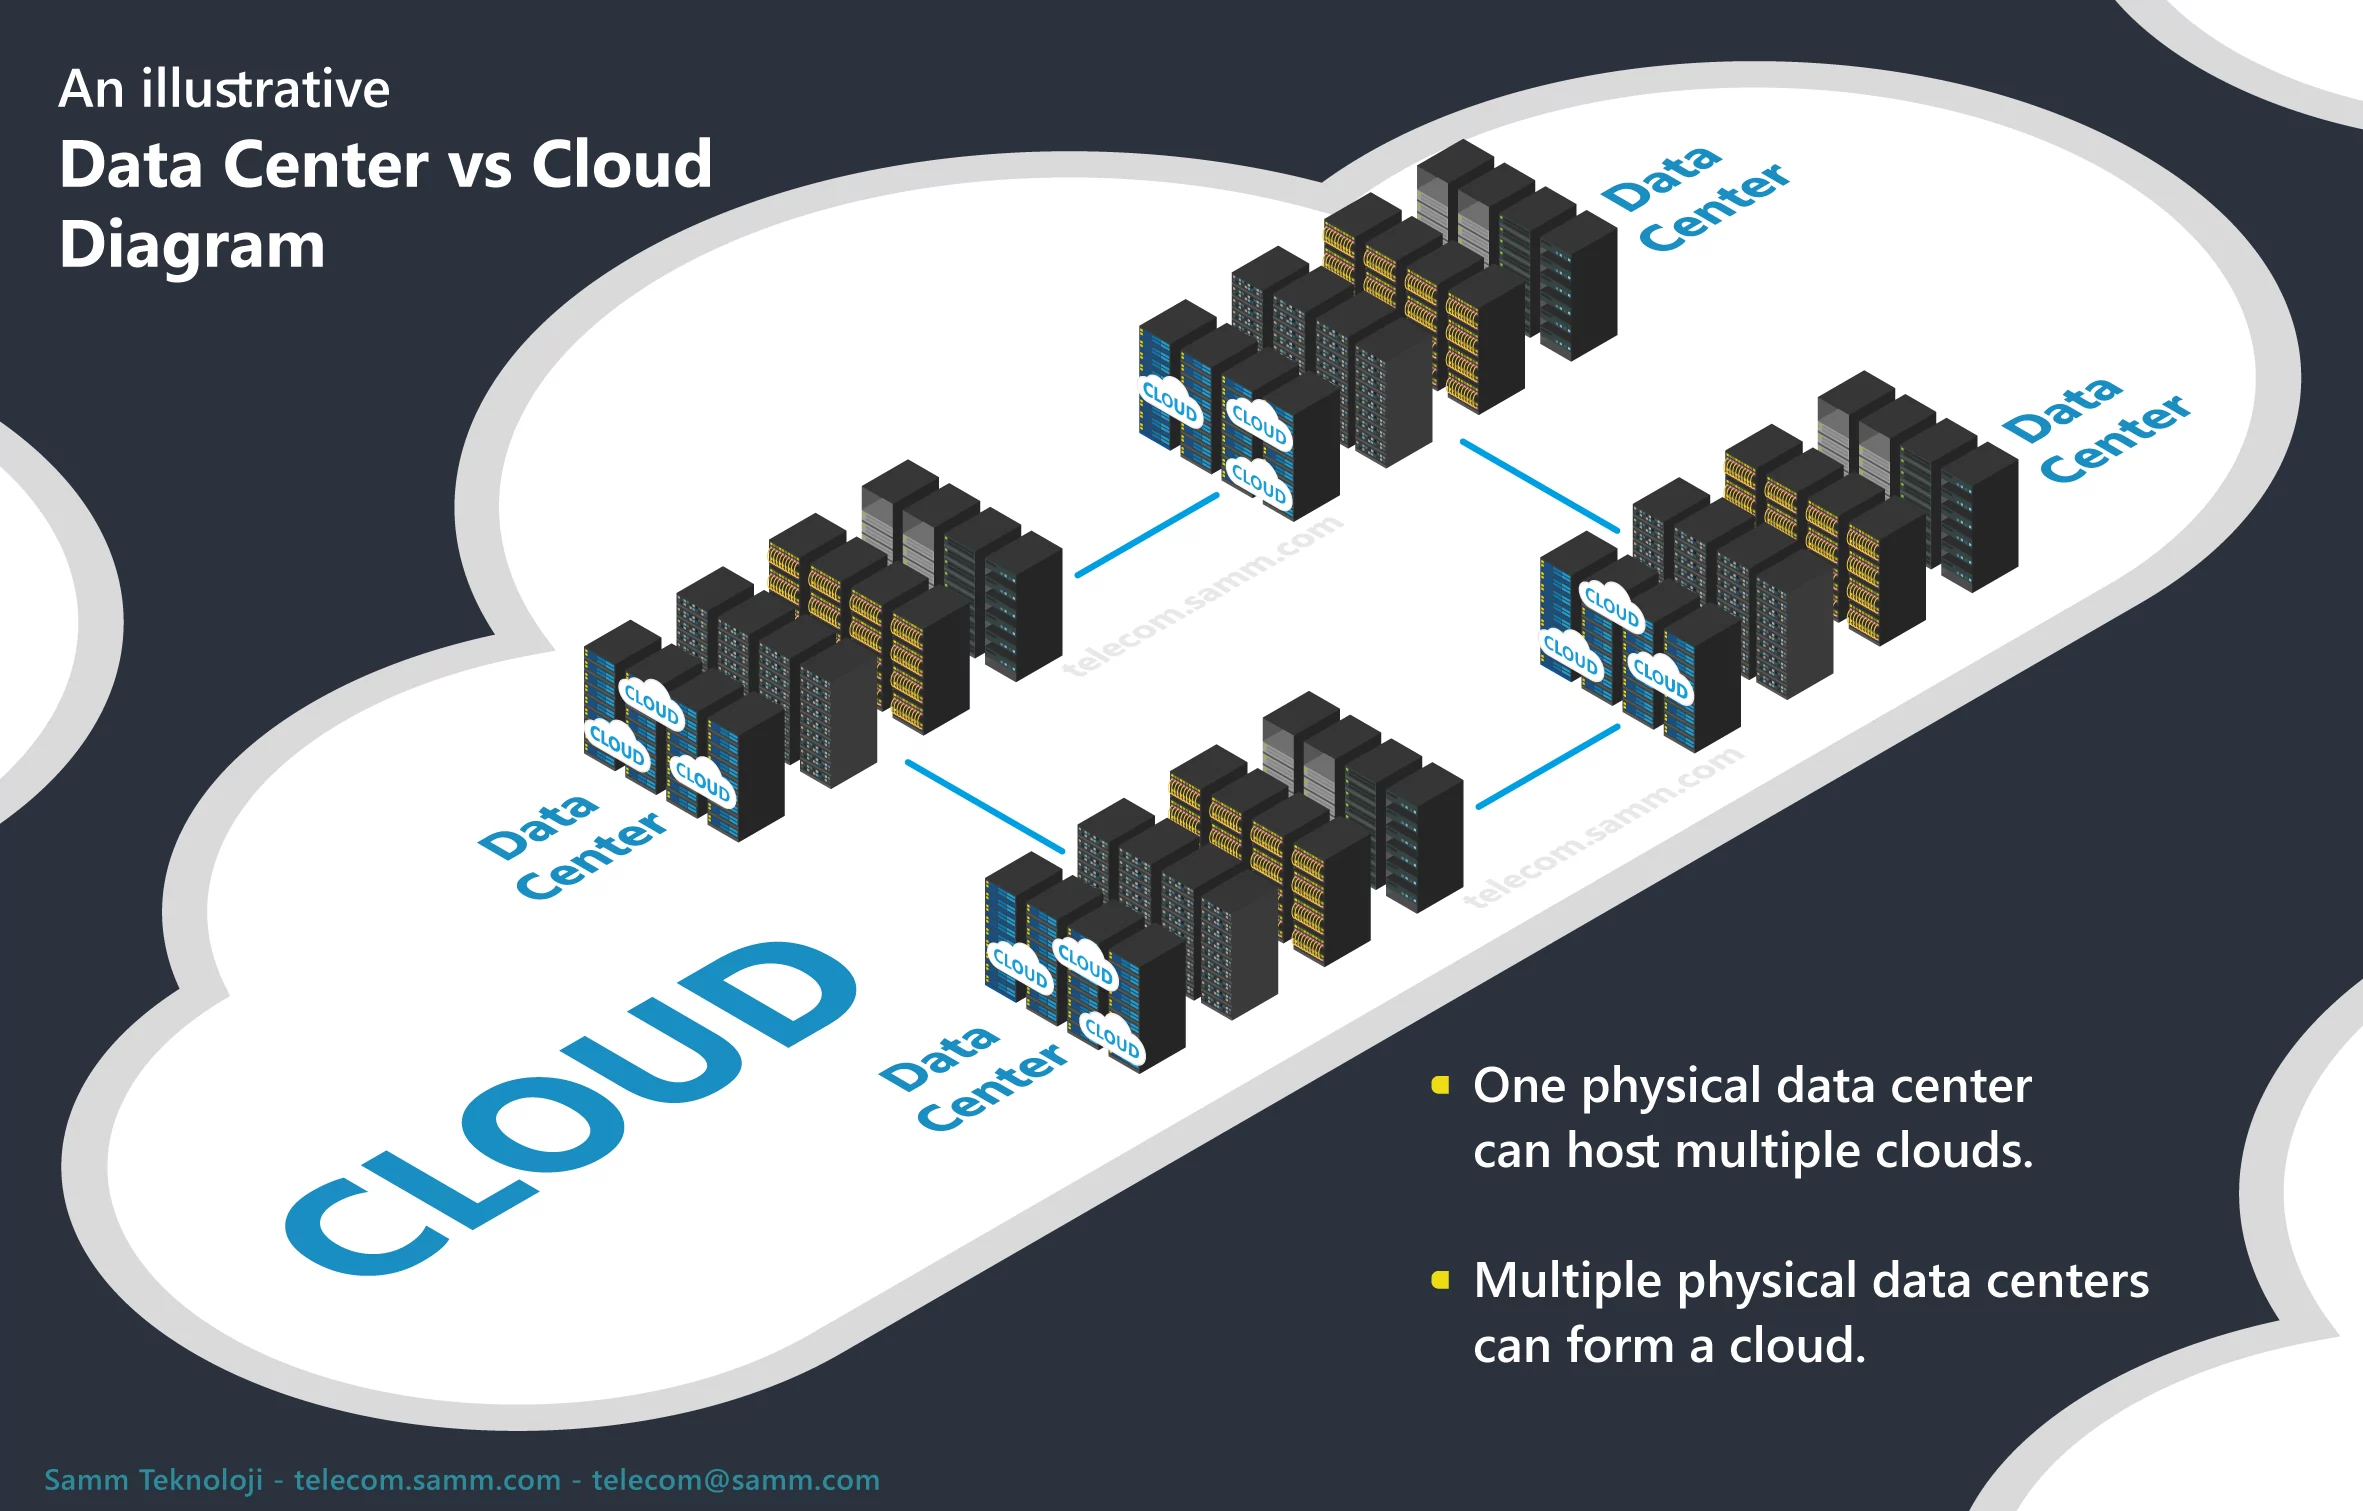 What is the difference between a data center and cloud?